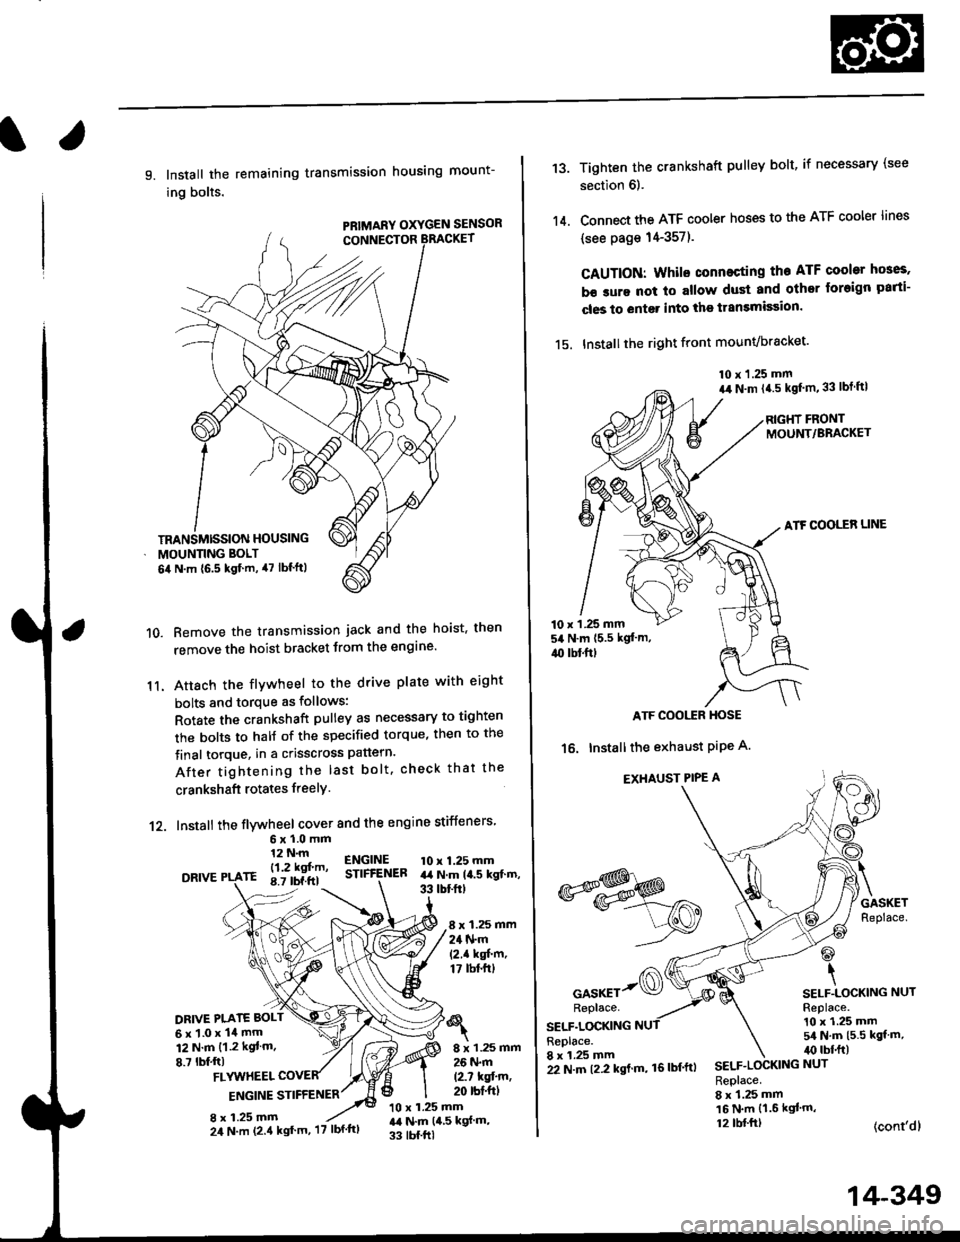 HONDA CIVIC 1997 6.G Workshop Manual l.
9. Install the remaining transmission housing mount-
ing bolts.
PRIMARY OXYGEN SENSOR
Remove the transmission jack and the hoist. then
remove the hoist bracket from the engine
Attach the flvwheel 